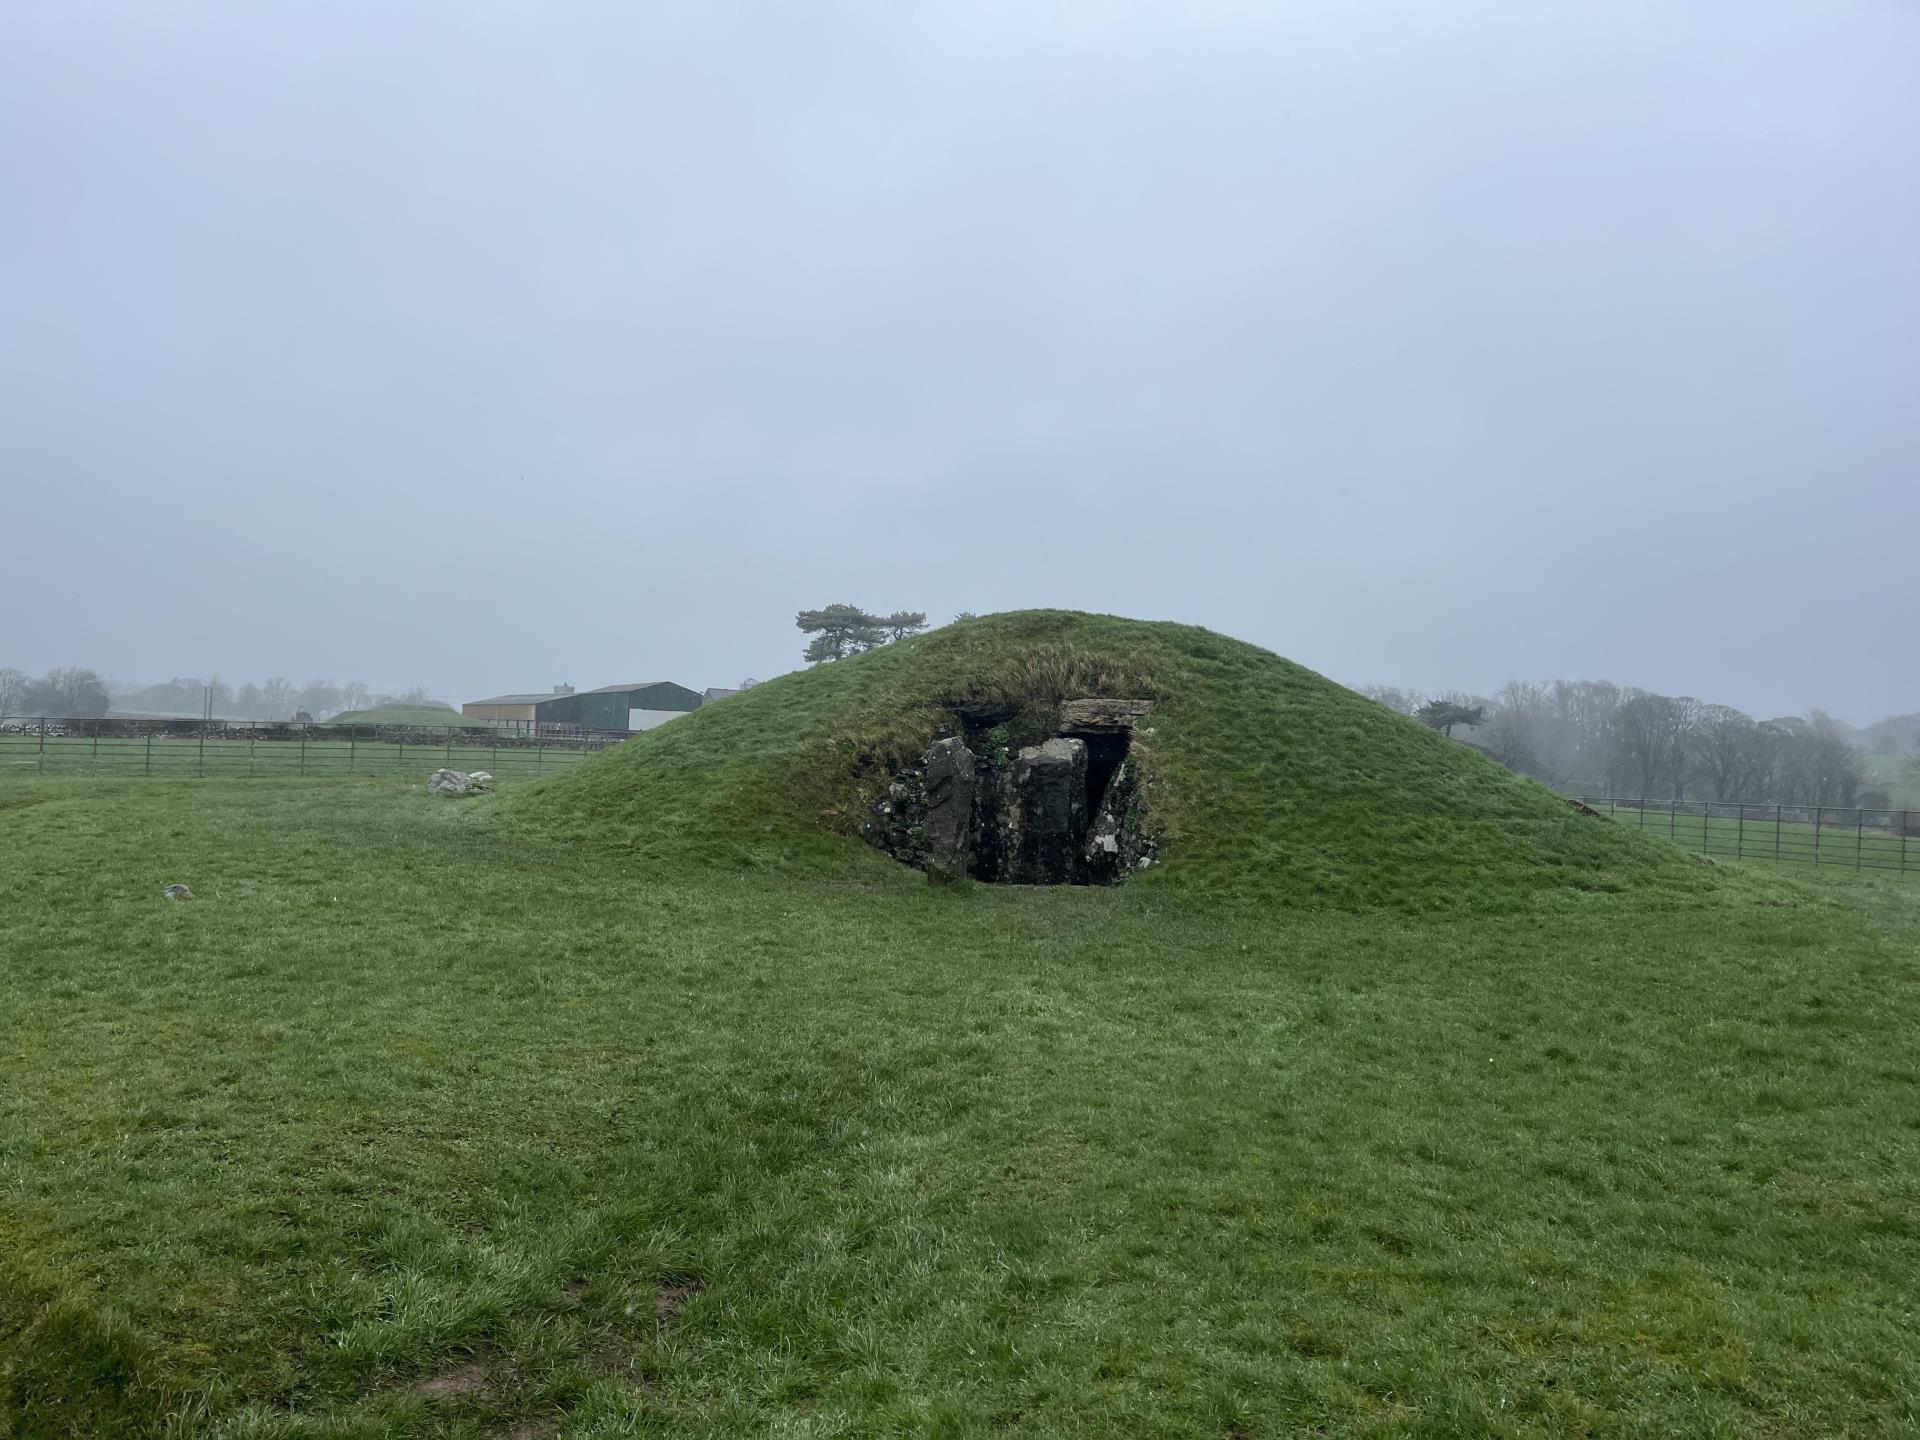 How about a neolithic burial chamber?